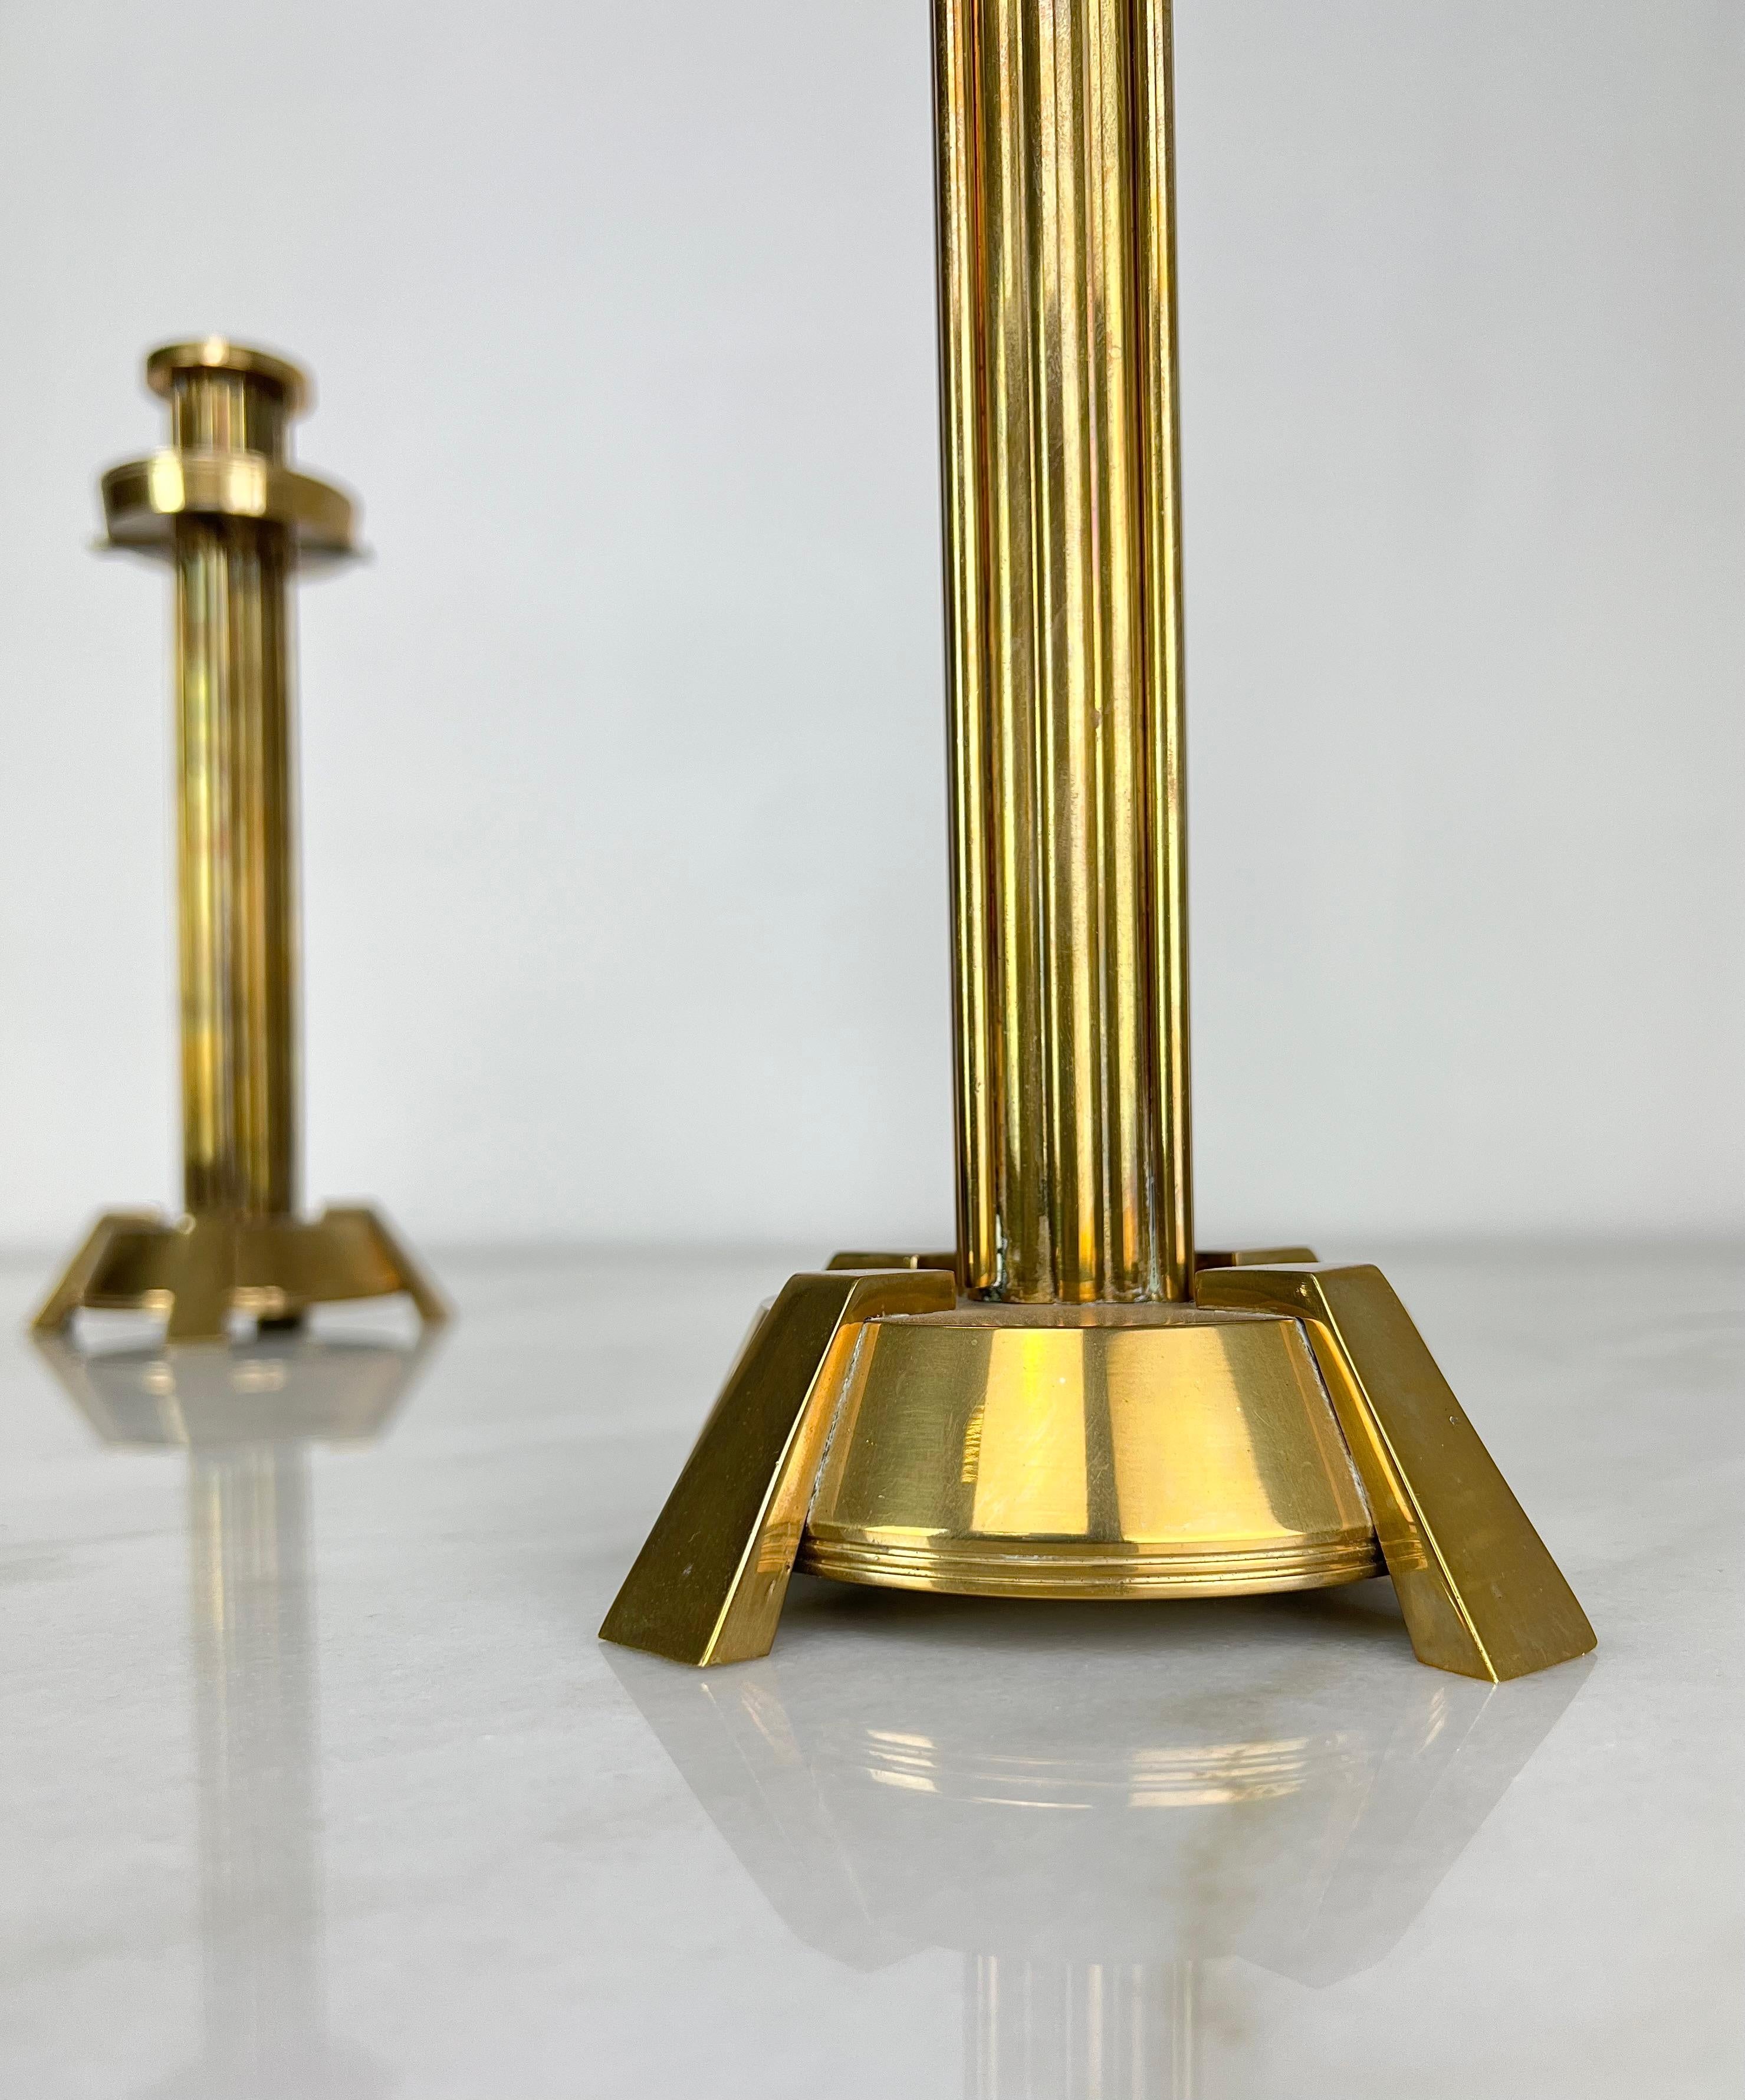 Decorative Object Brass Candelabras Candle Holders Midcentury Italy 70s Set of 4 For Sale 4